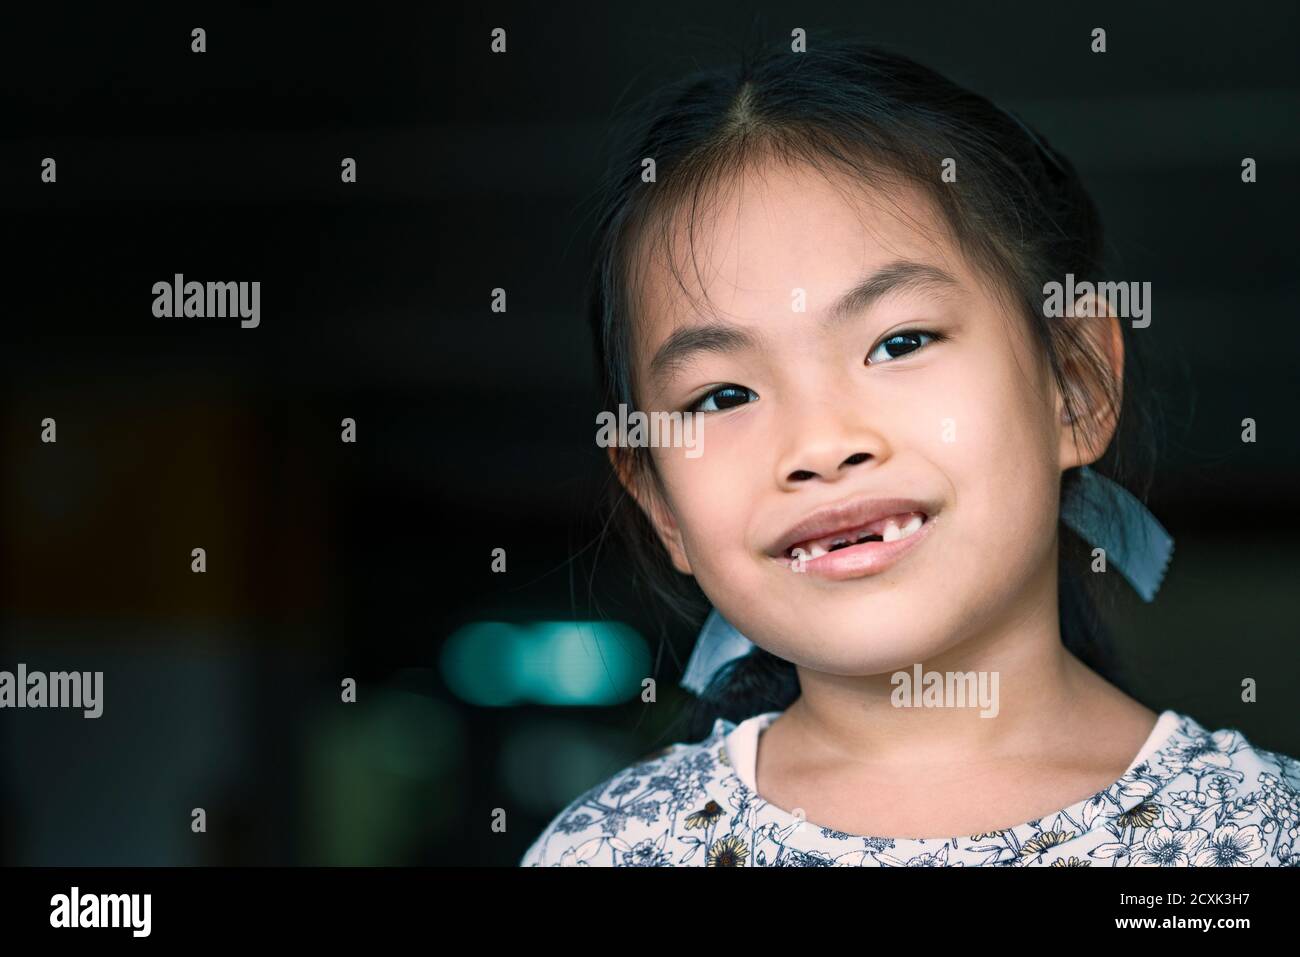 Asian child girl missing front tooth, smiling face. Close up to cute ...